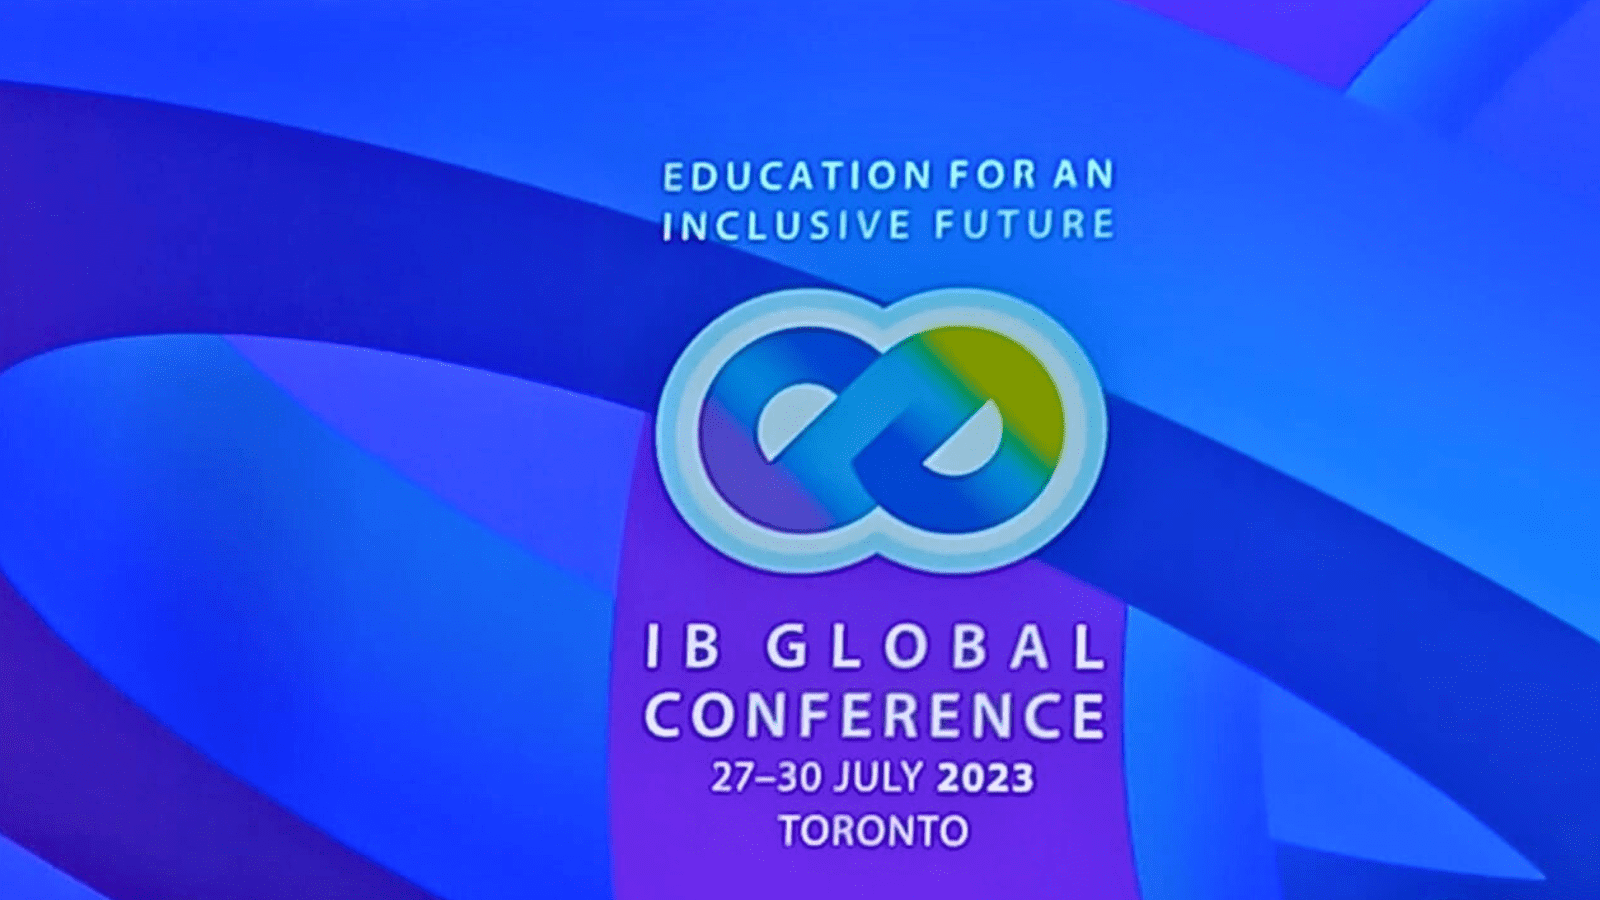 Building an Inclusive Future Highlights from the IB Global Conference 2023